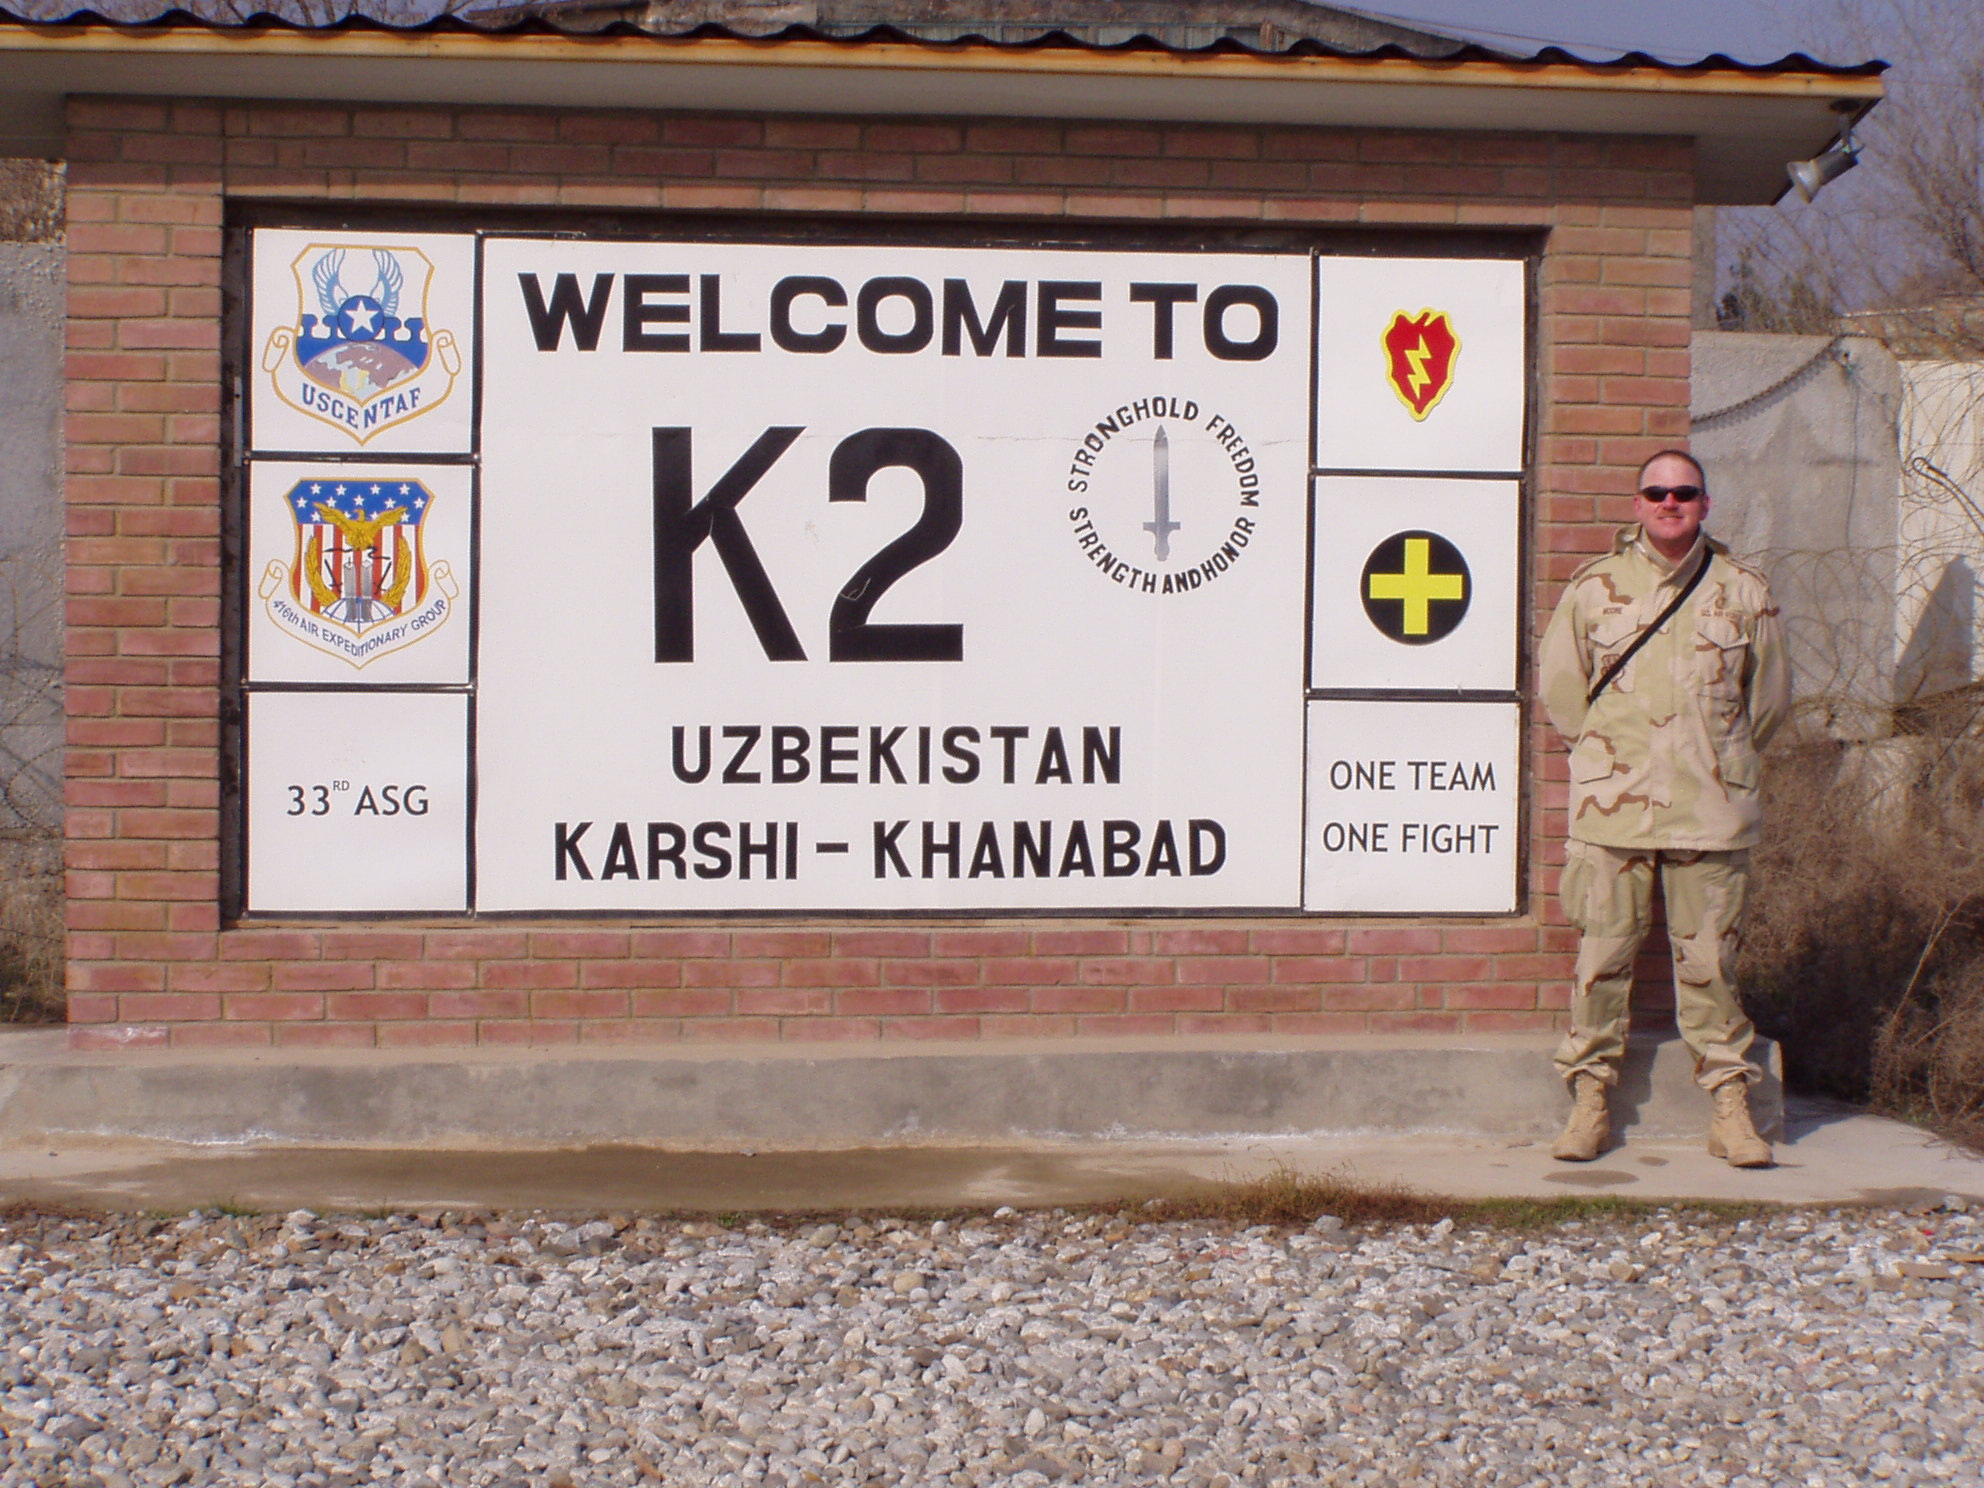 K2 base in Uzbekistan whre American Troups were stationed from 2001-2005 during Afghan war